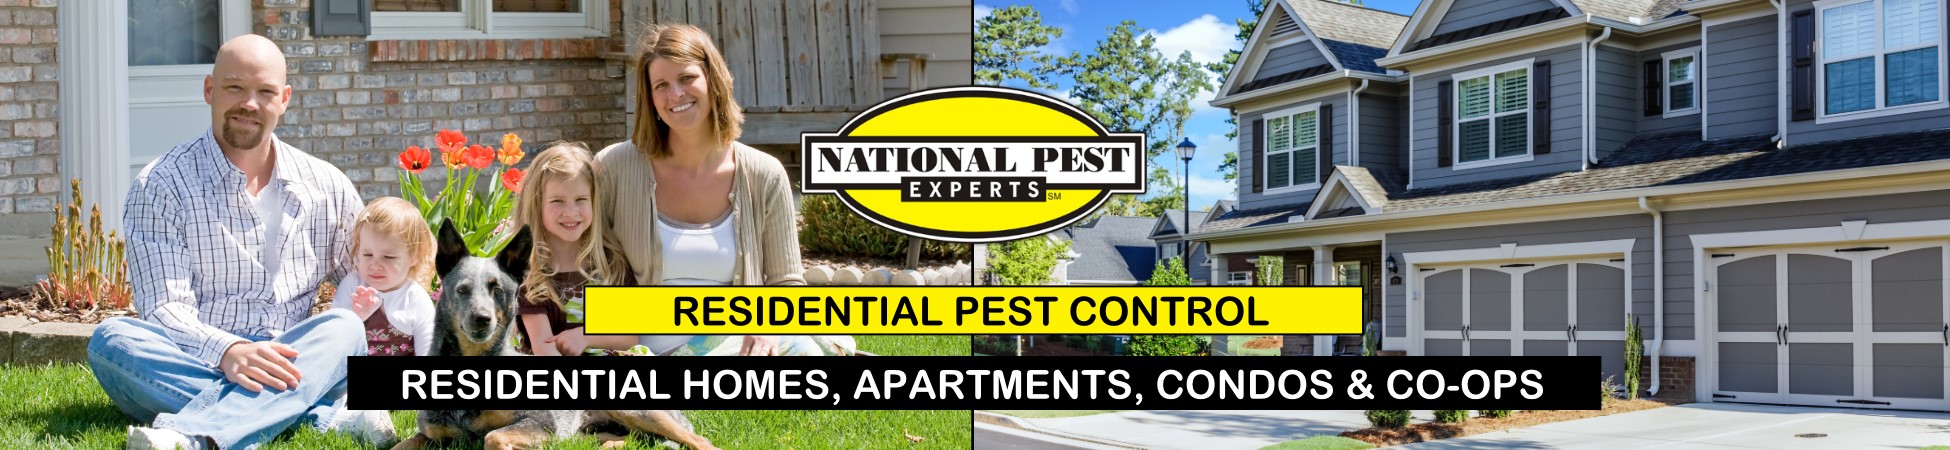 National Pest Experts - Residential exterminating and pest control in Locust Valley, NY